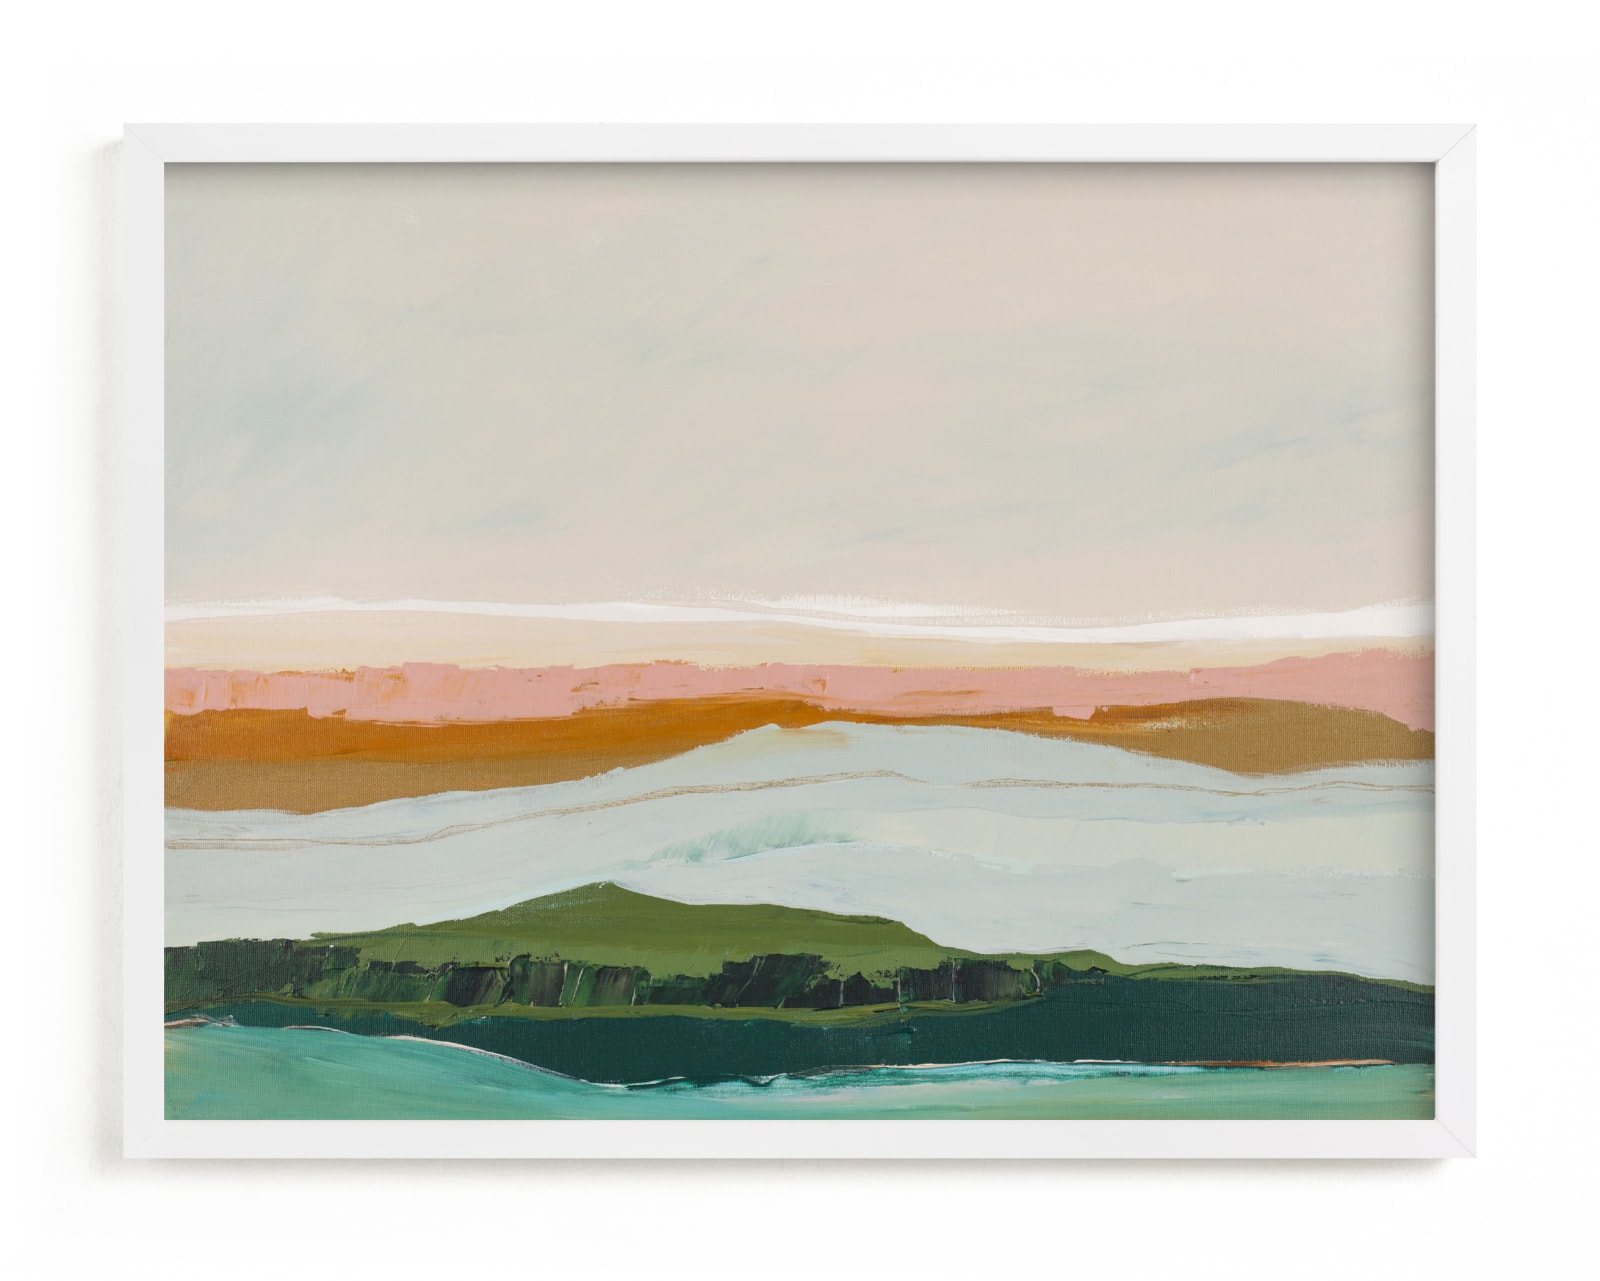 This is a pink art by Caryn Owen called Abstract Seascape Pt Reyes, California.